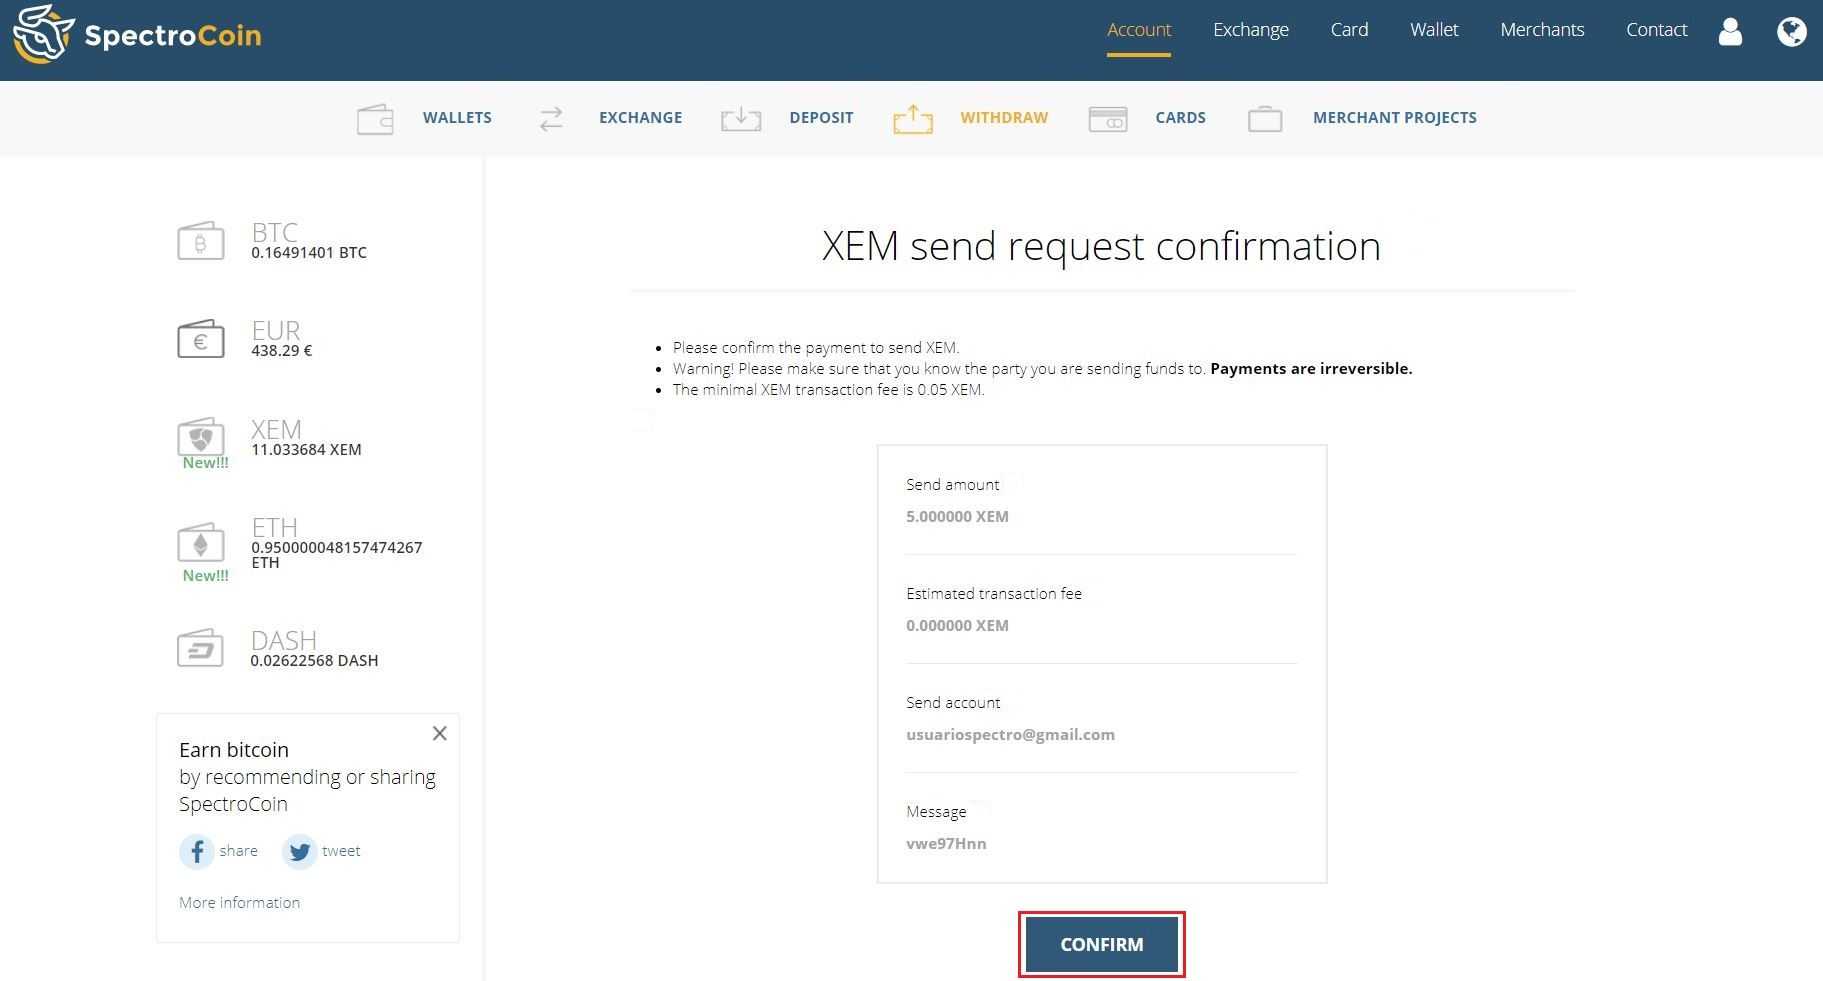 SpectroCoin button to confirm the XEM withdraw